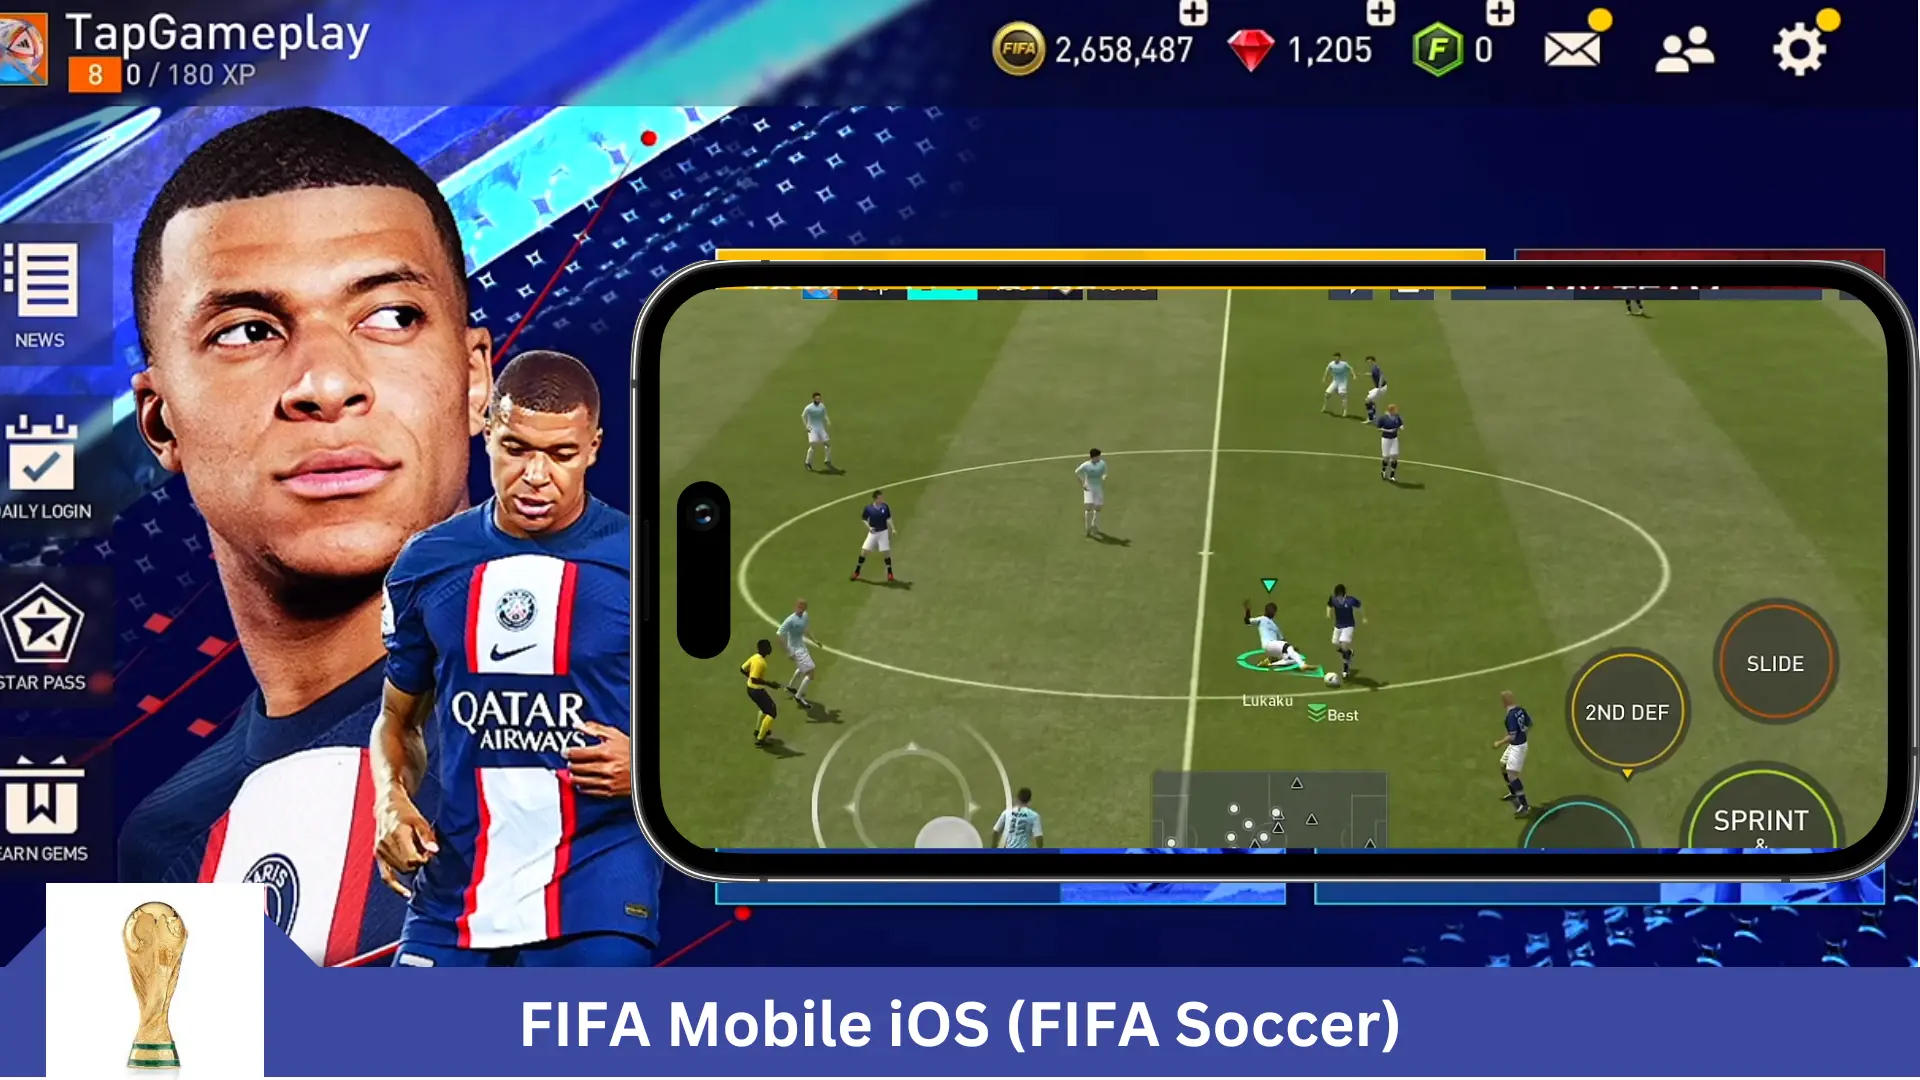 FIFA Mobile Soccer: Is it worth the wait?